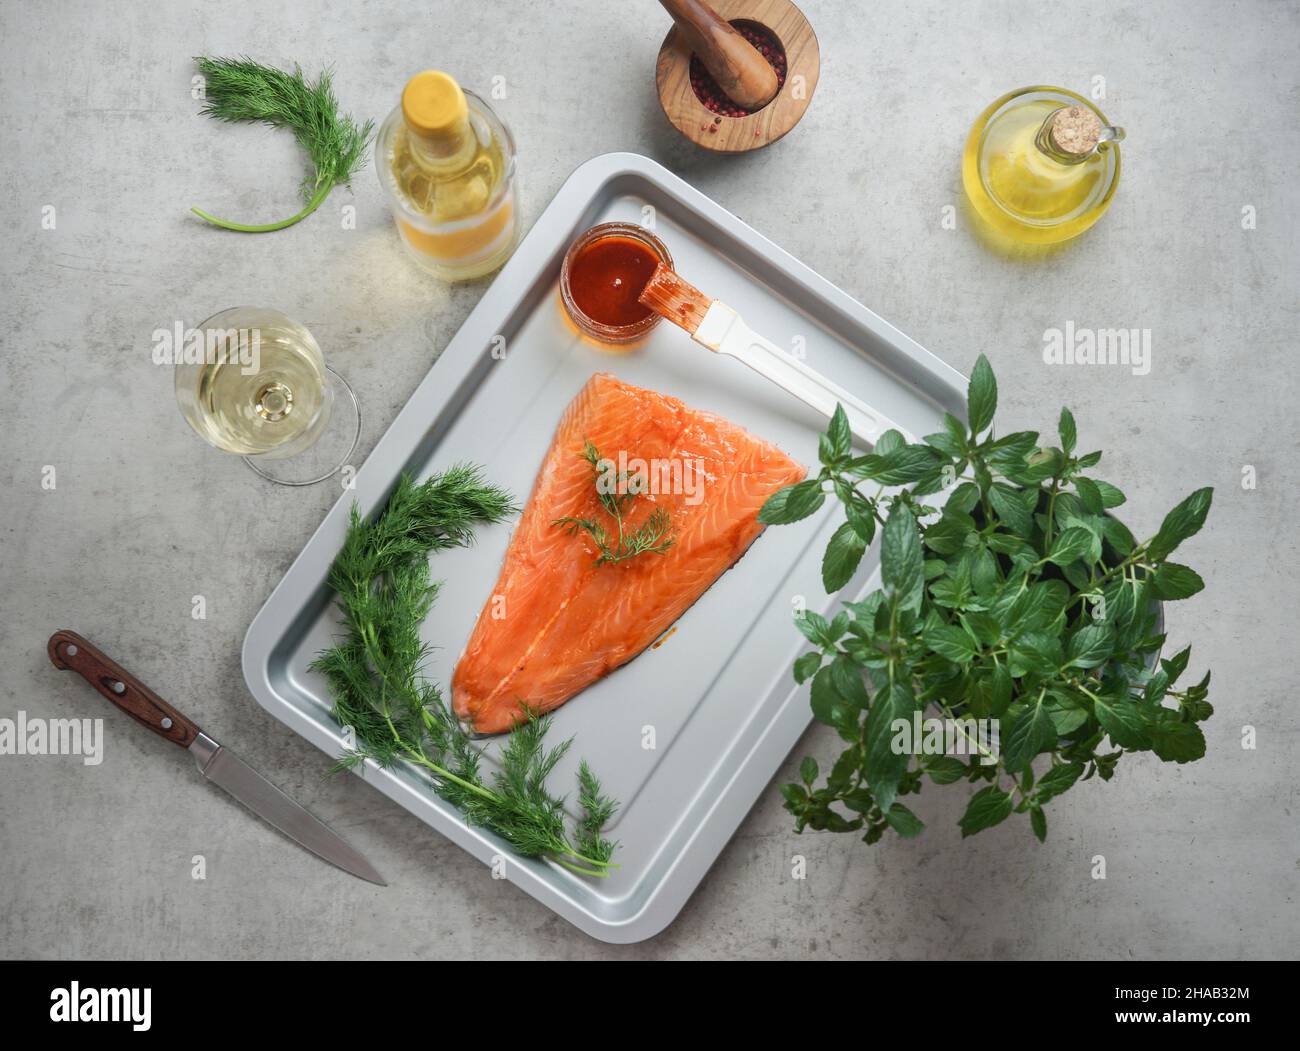 Preparation of salmon fish fillet on baking tray with healthy ingredients: herbs, spices, wine, oil and kitchen utensils on table. Healthy cooking wit Stock Photo